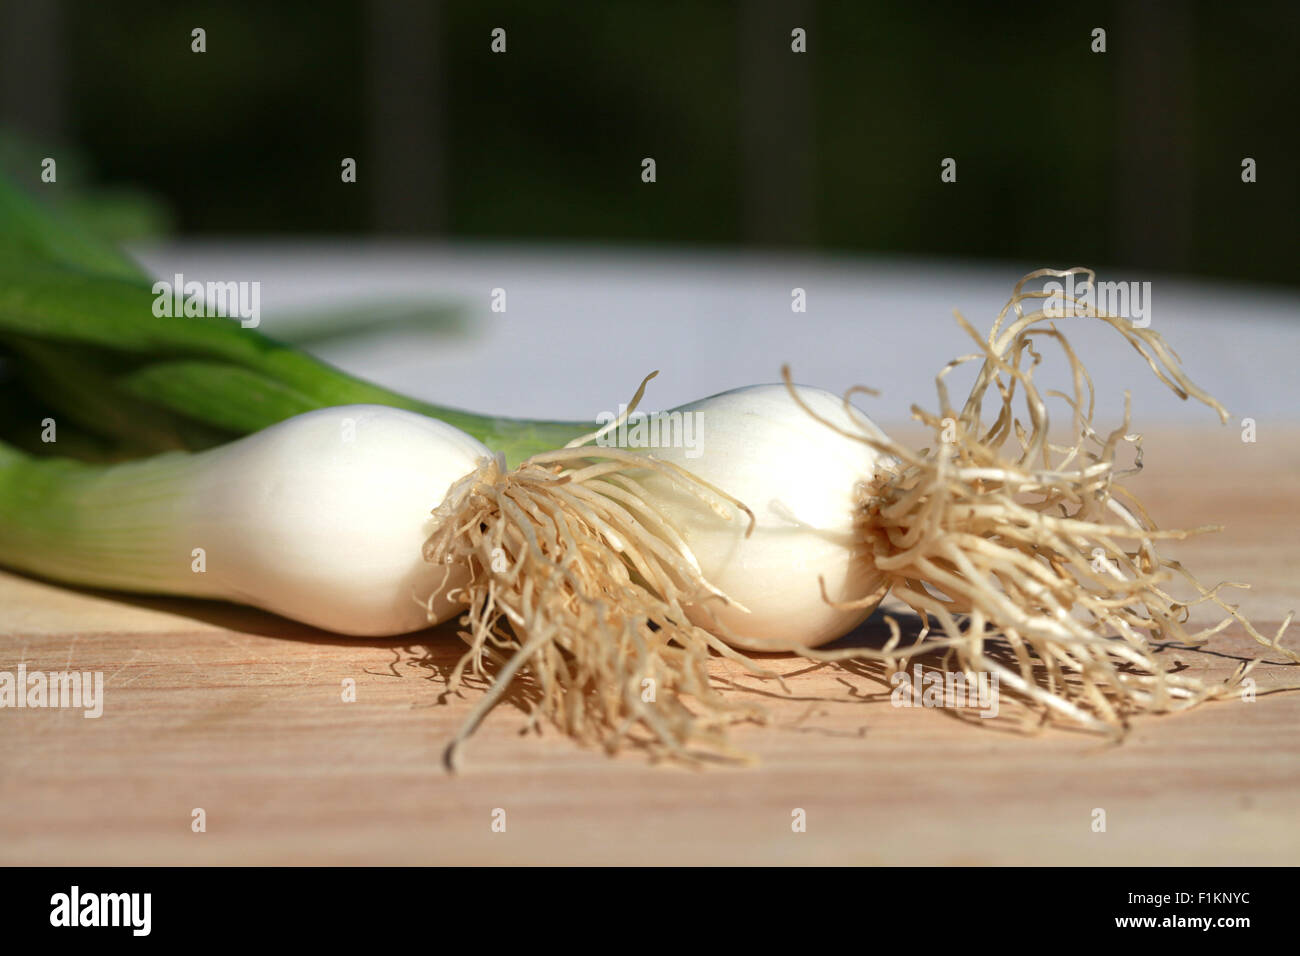 Two large, fresh, spring onions, scallions or salad onions with roots still attached, waiting to be prepared on an outside table. Stock Photo